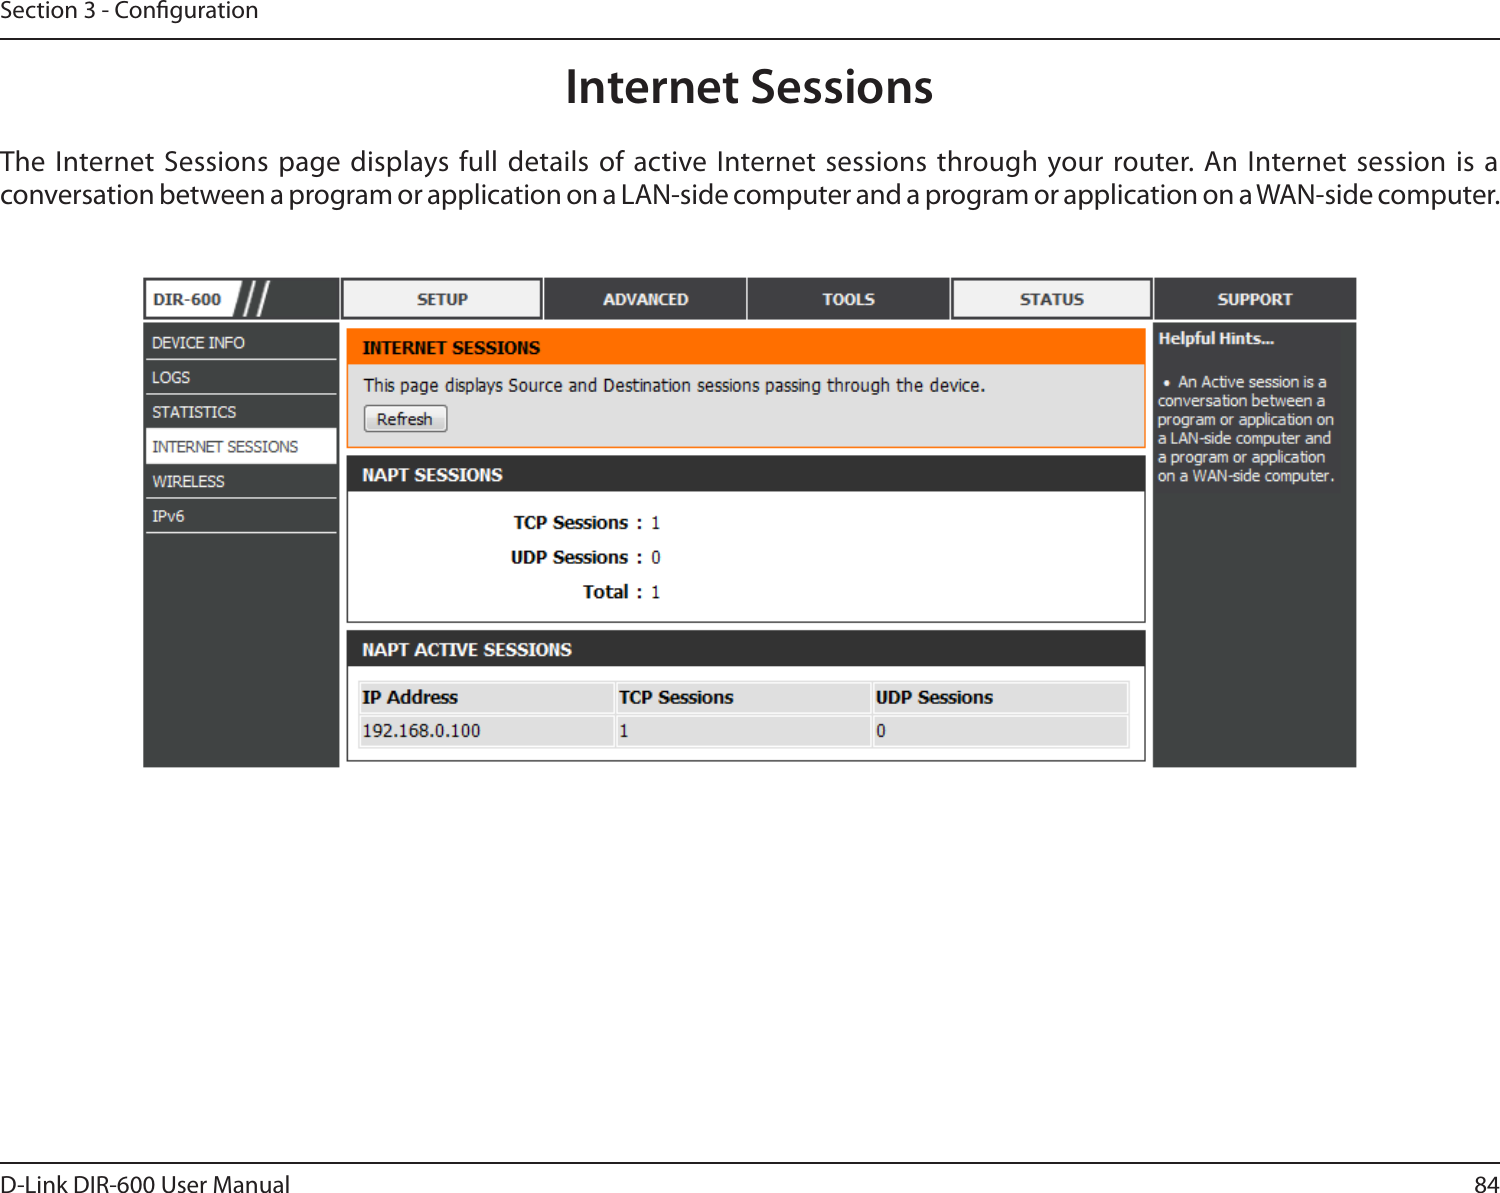 84D-Link DIR-600 User ManualSection 3 - CongurationInternet SessionsThe Internet Sessions  page displays full details of active Internet sessions through your router. An Internet session is a conversation between a program or application on a LAN-side computer and a program or application on a WAN-side computer. 